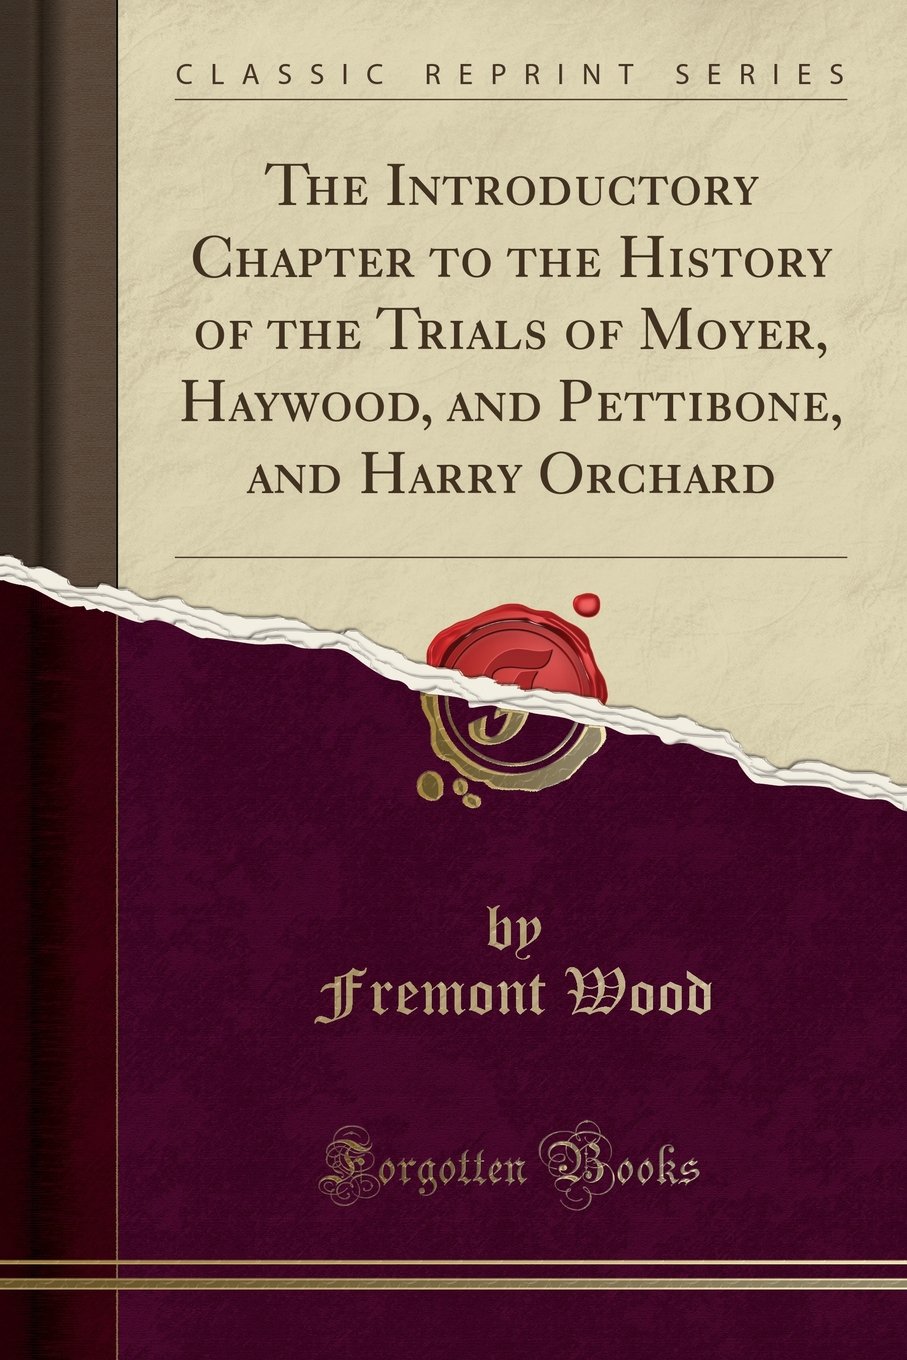 The introductory chapter to the history of the trials of Moyer, Haywood, and Pettibone, and Harry Orchard (book cover)